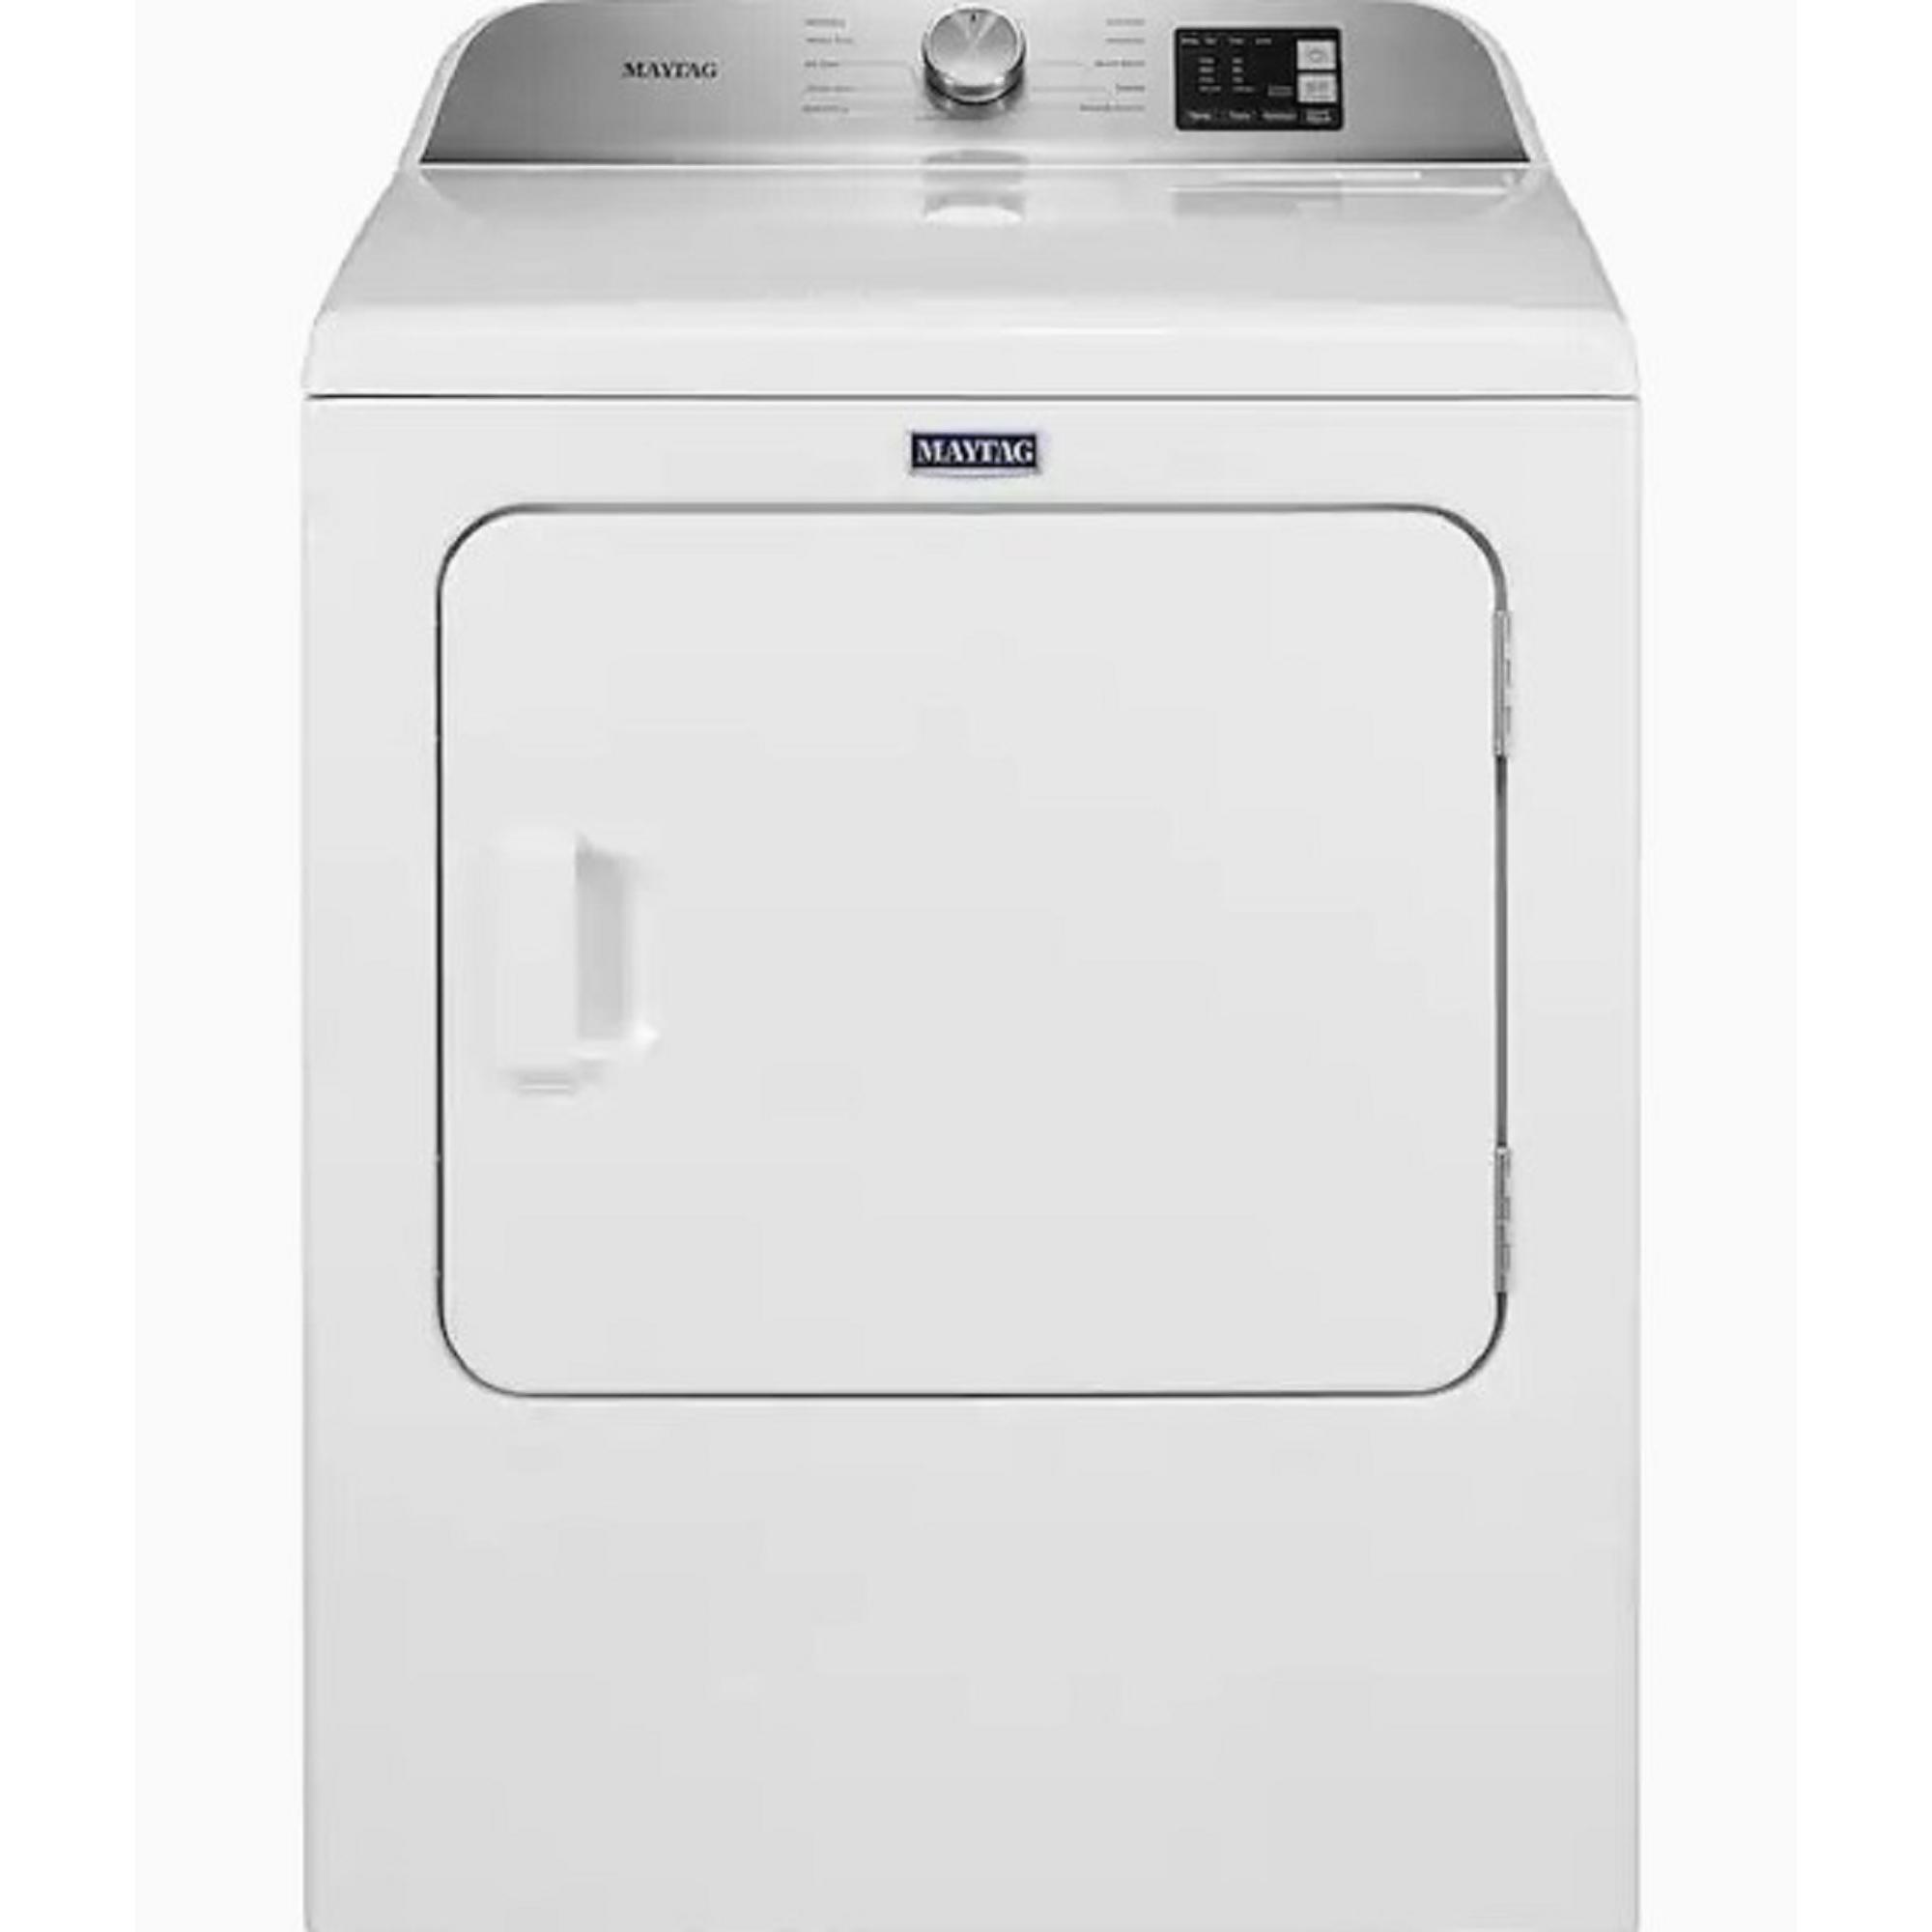 Maytag MED6200KW 29" 7.0 Cu. Ft. White Electric Dryer